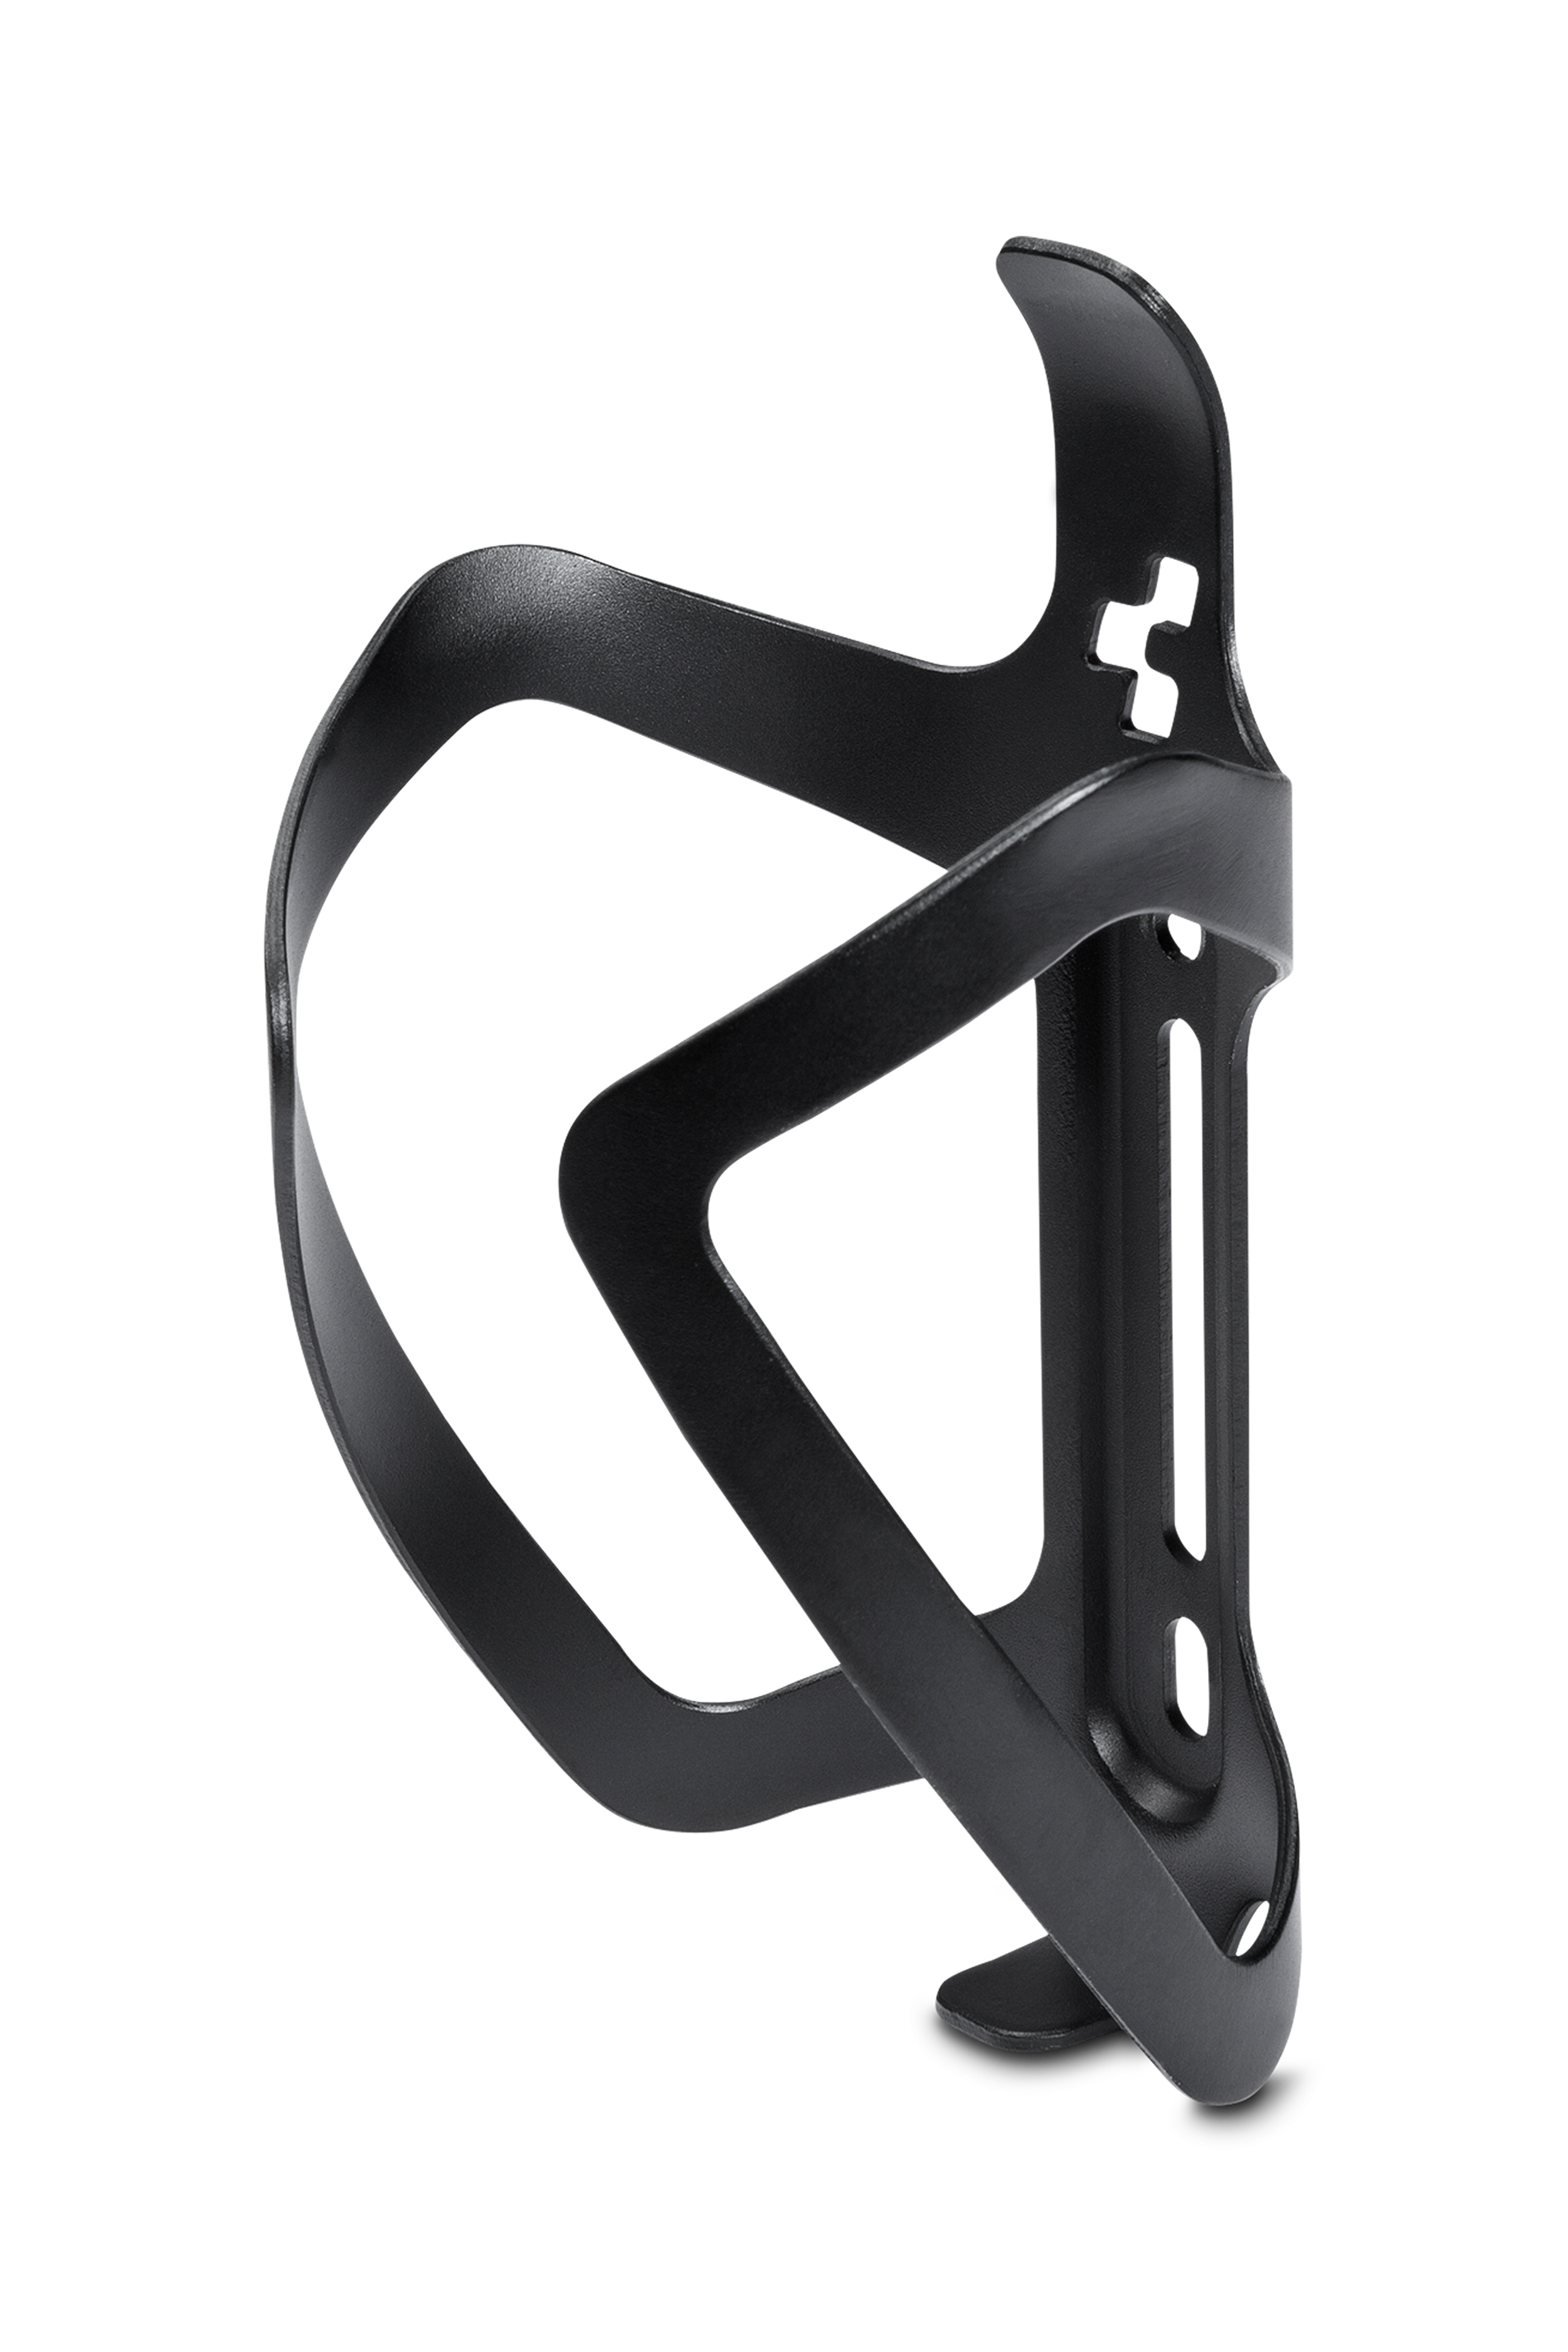 CUBE Bottle Cage HPA Top Cage